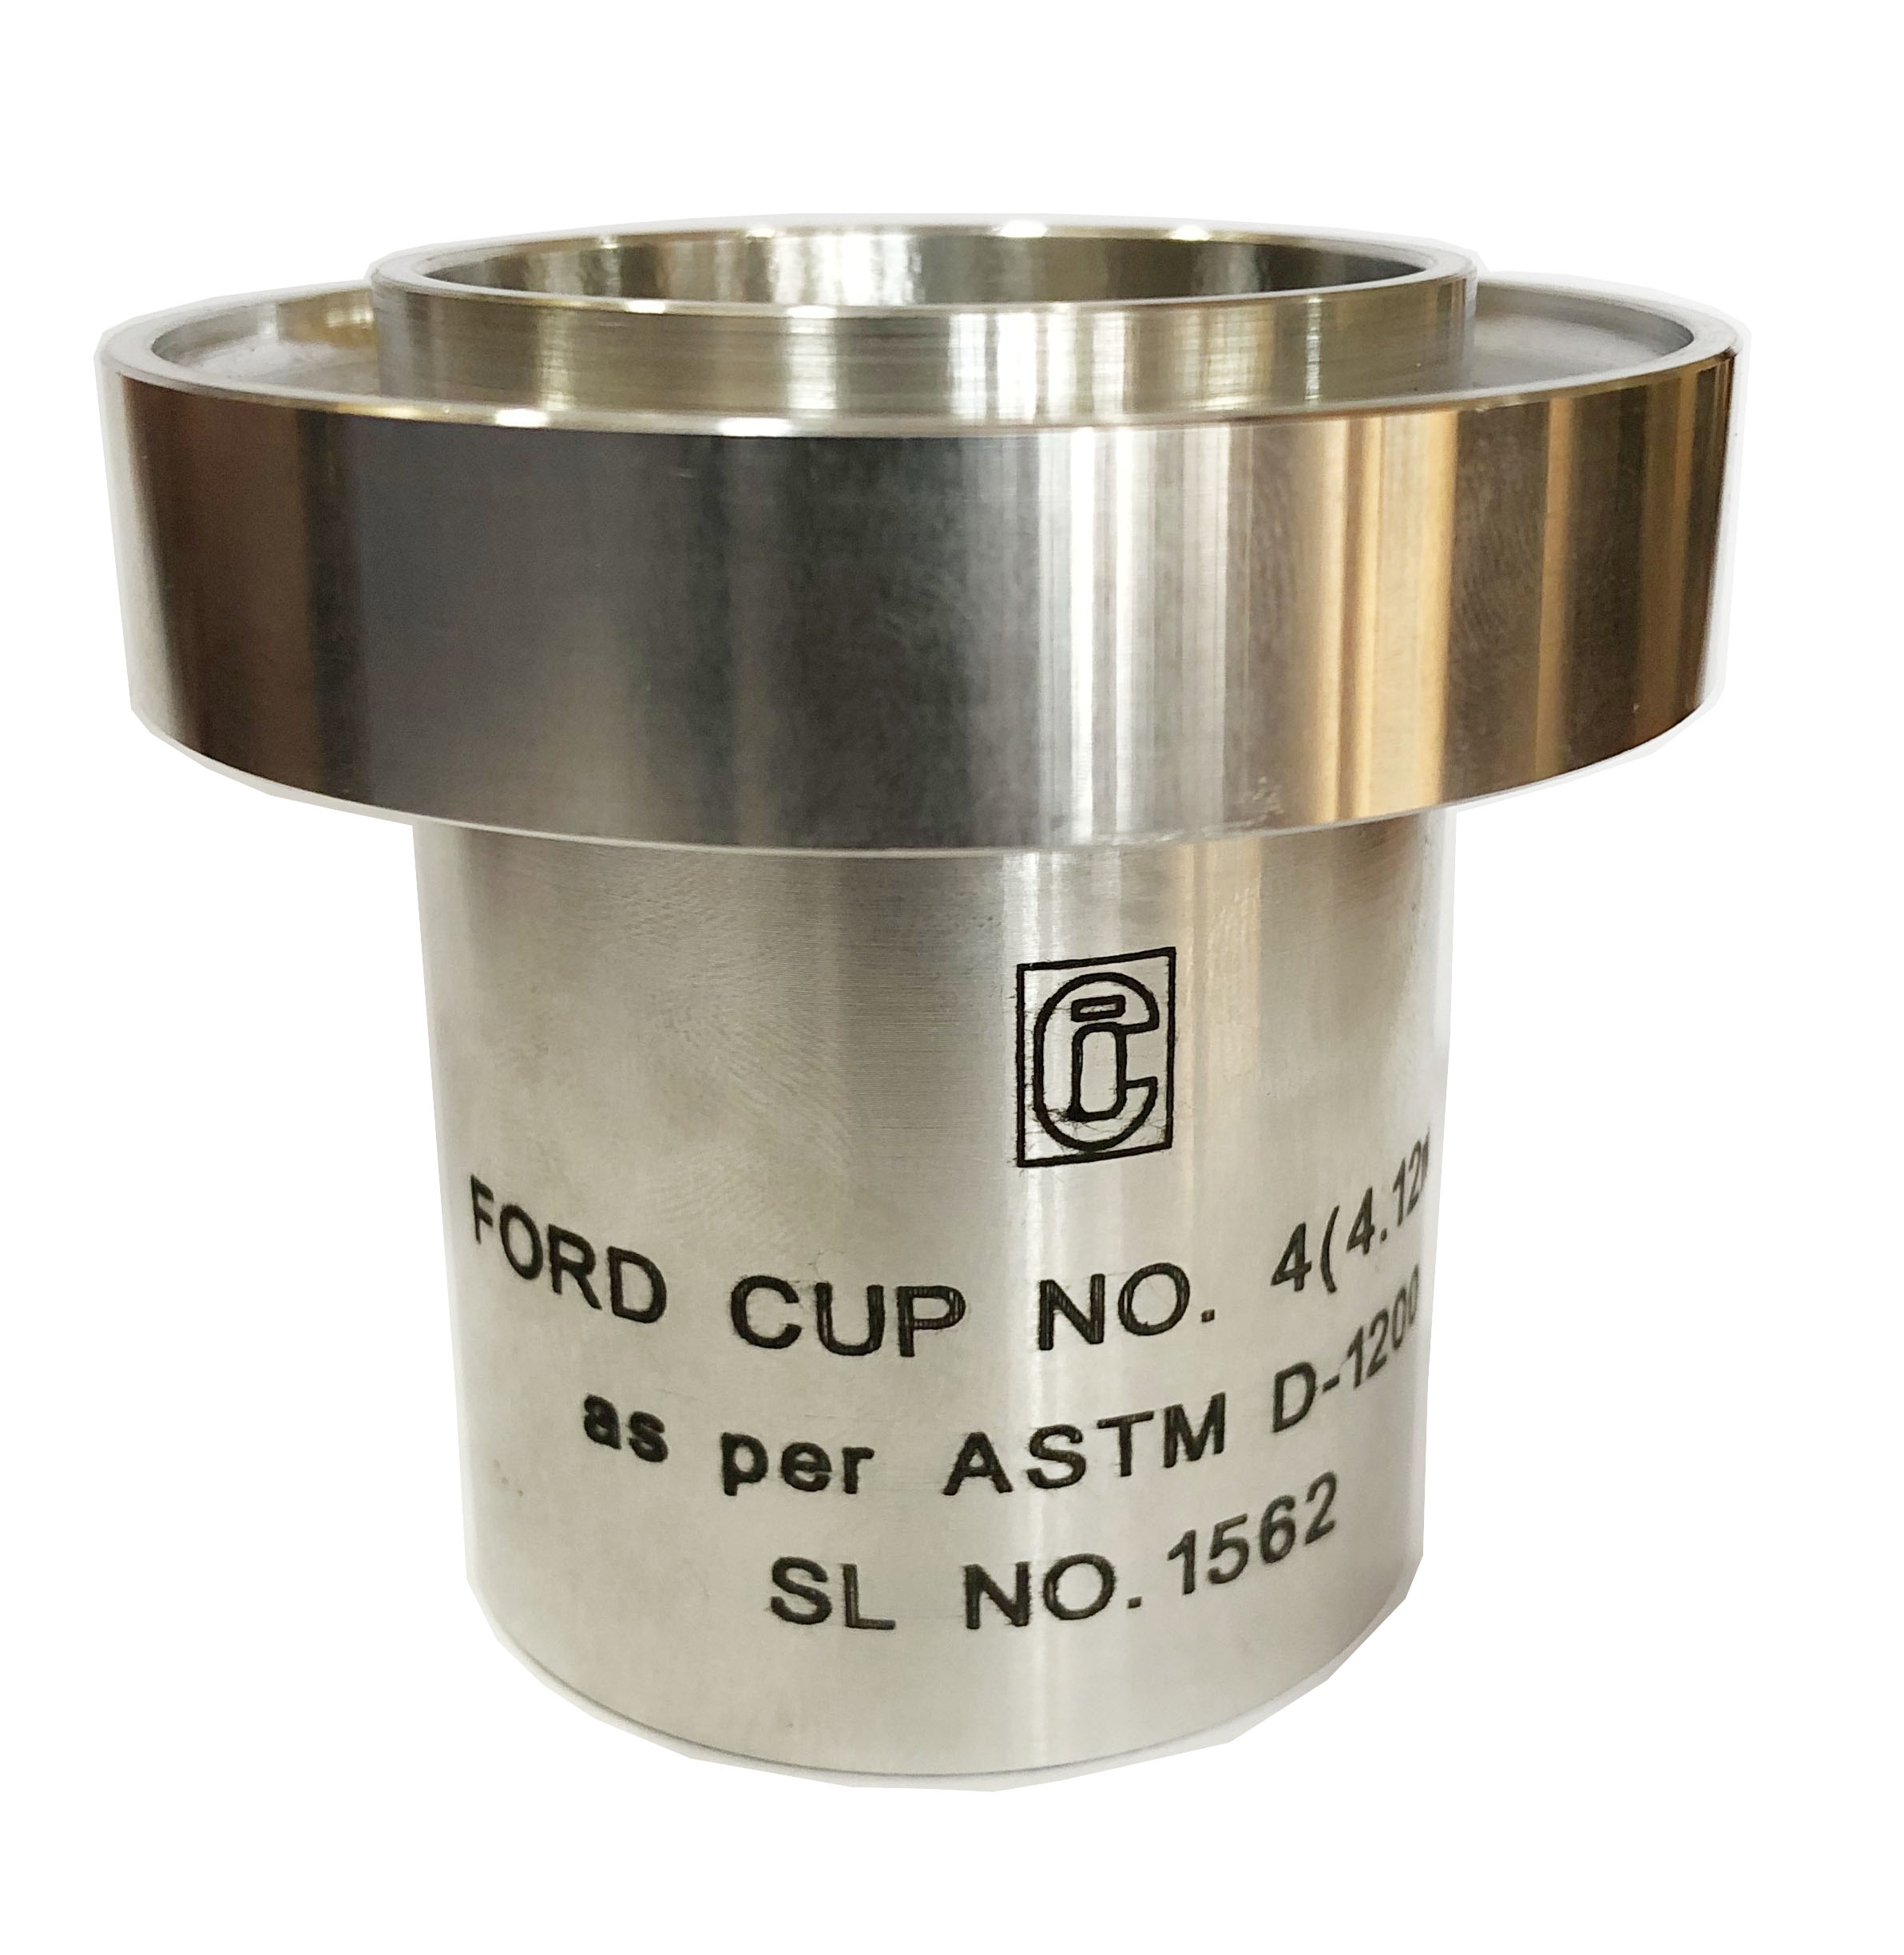 'CI' FORD CUP VISCOMETER (ASTM-D 1200)